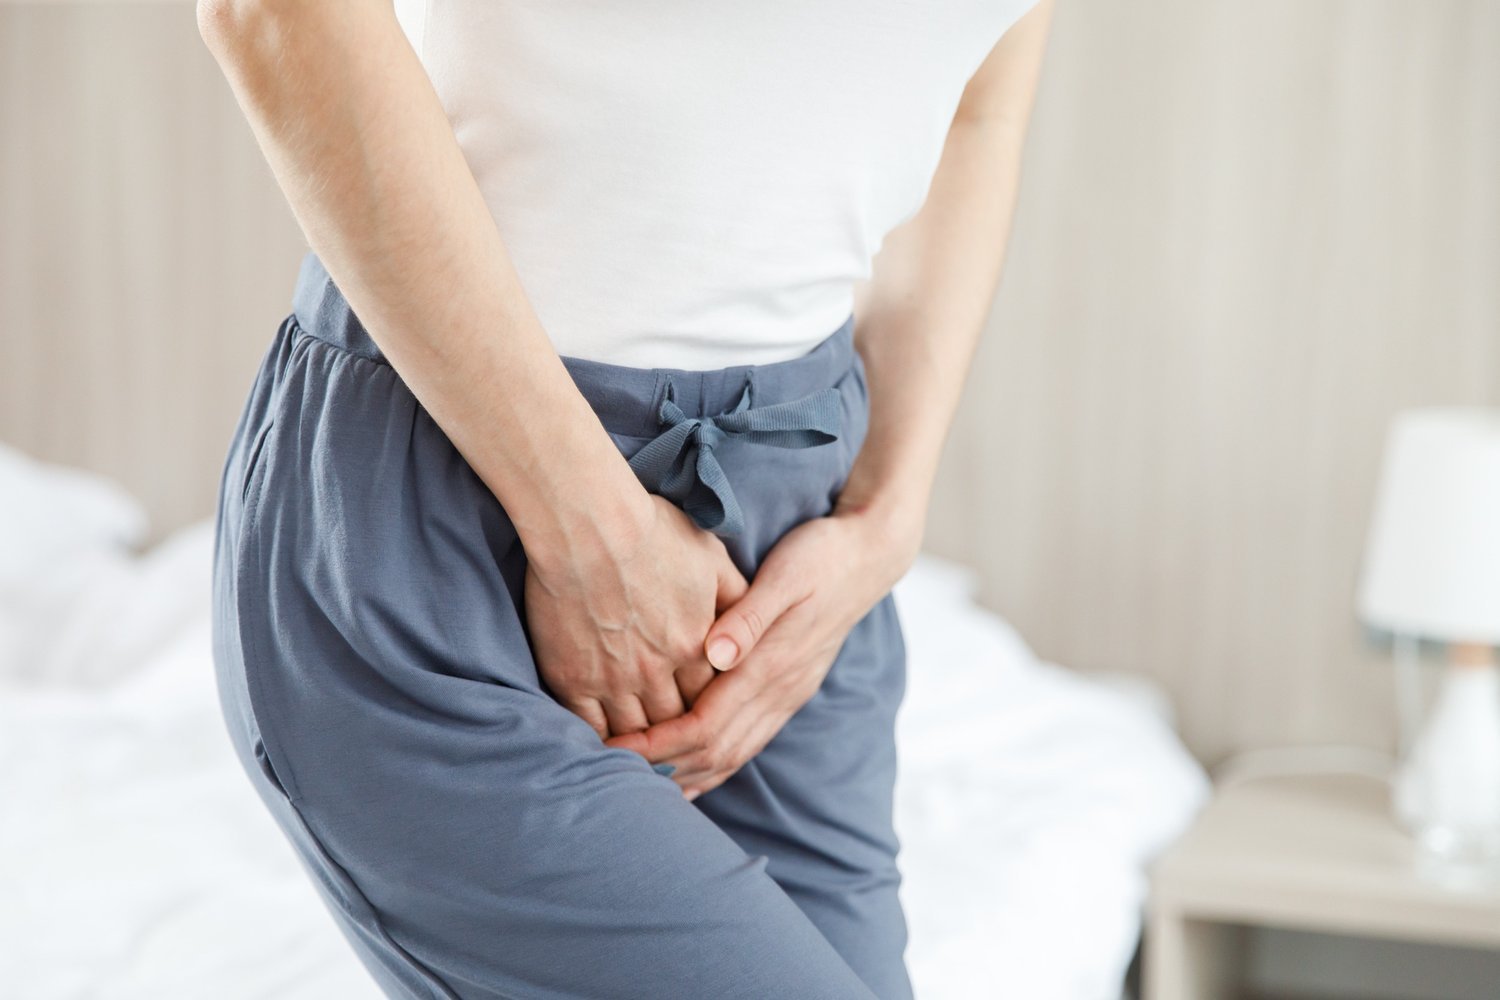 The Causes and Treatment Options For An Overactive Bladder